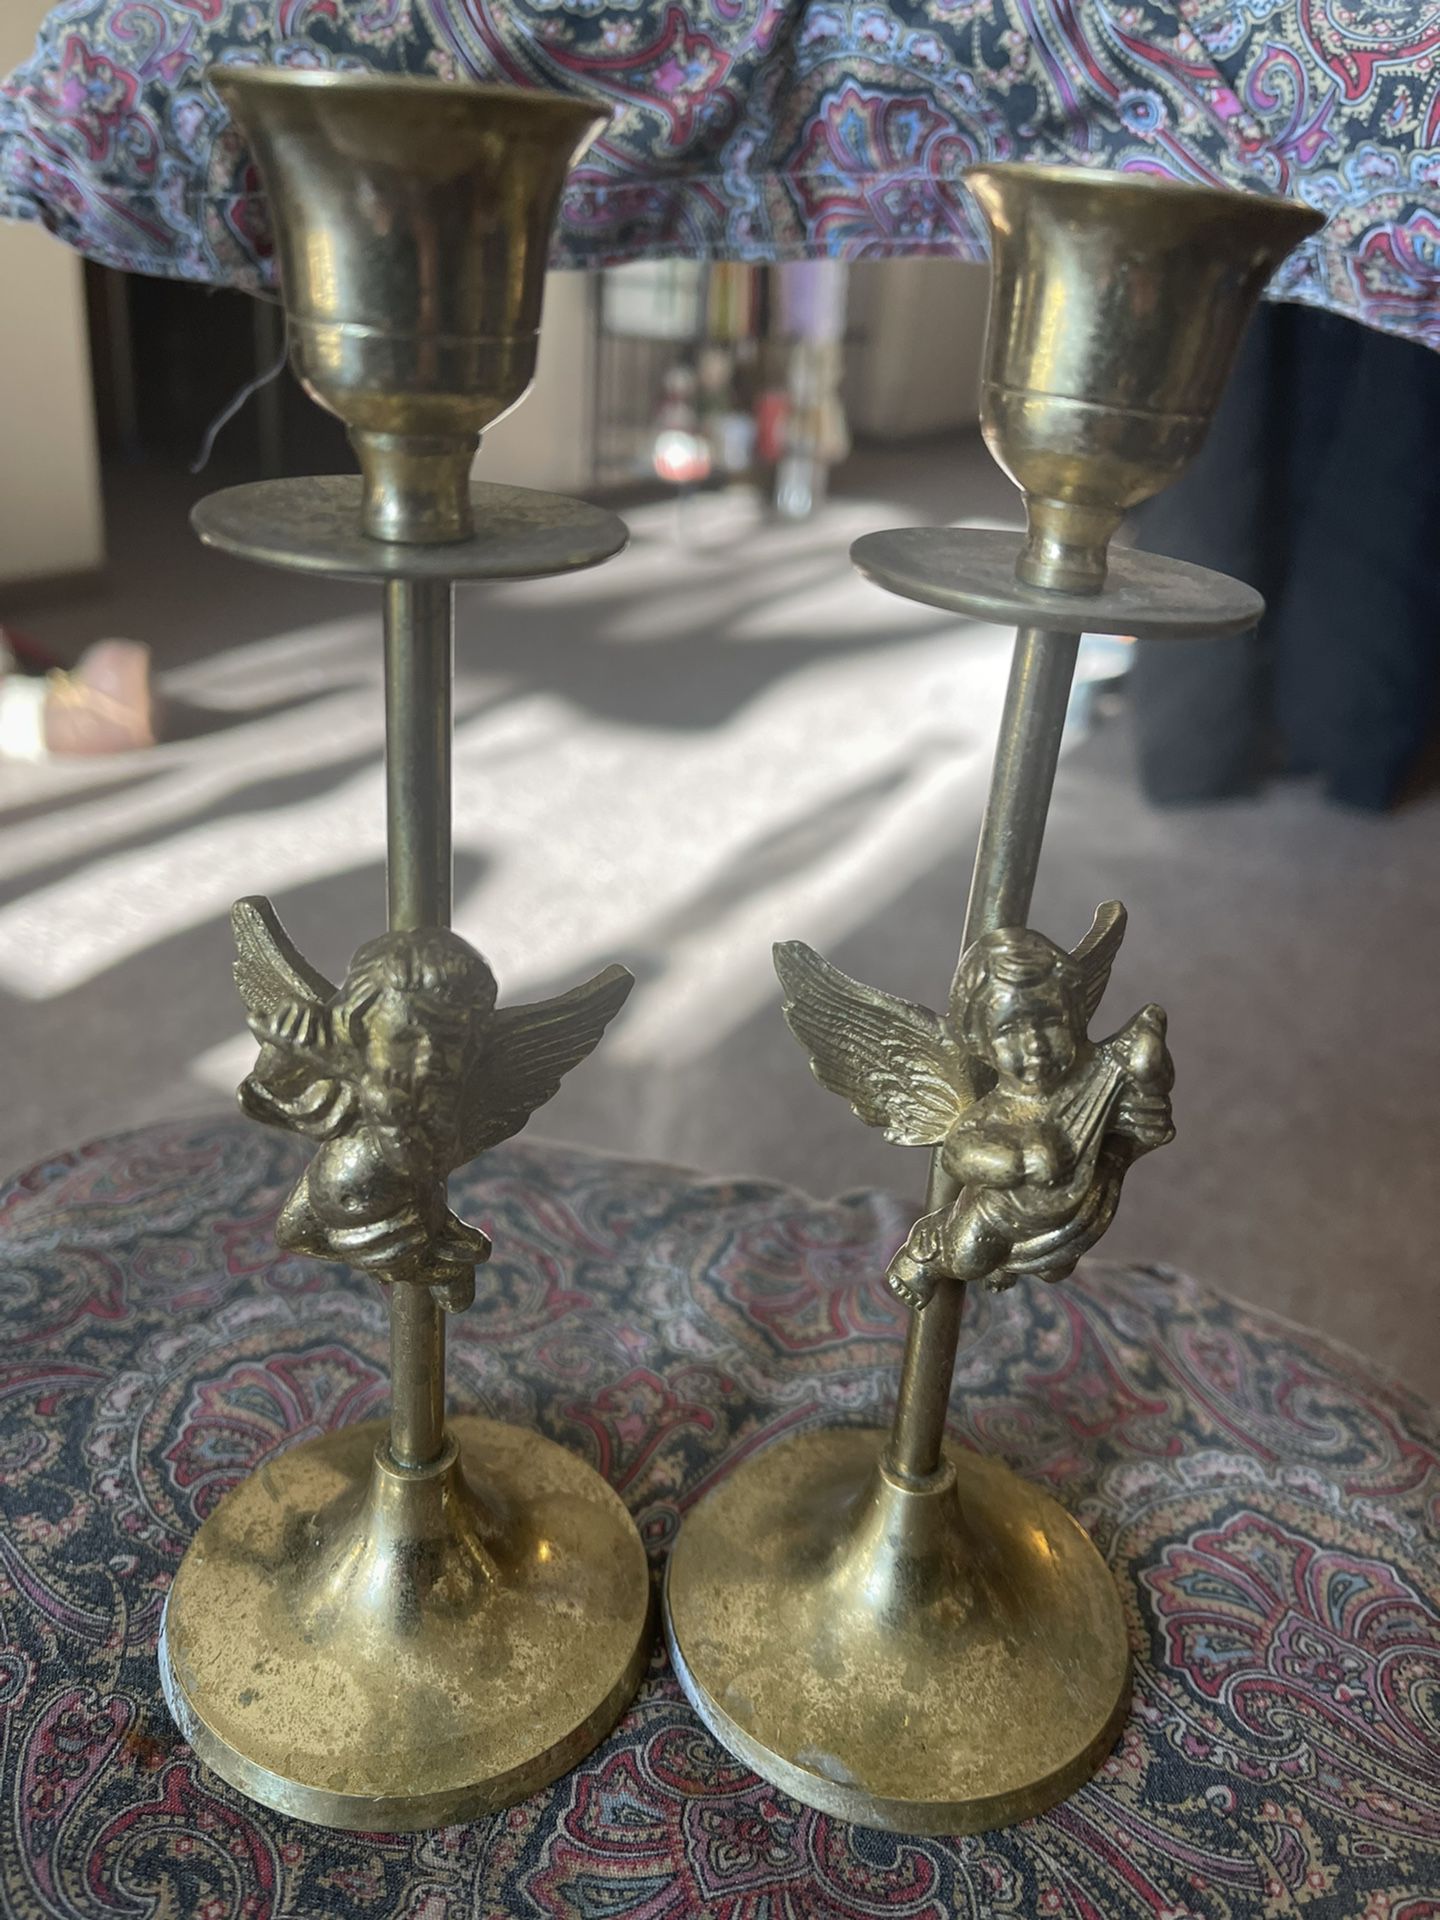 Vintage Gold Candlesticks With Angles On Them